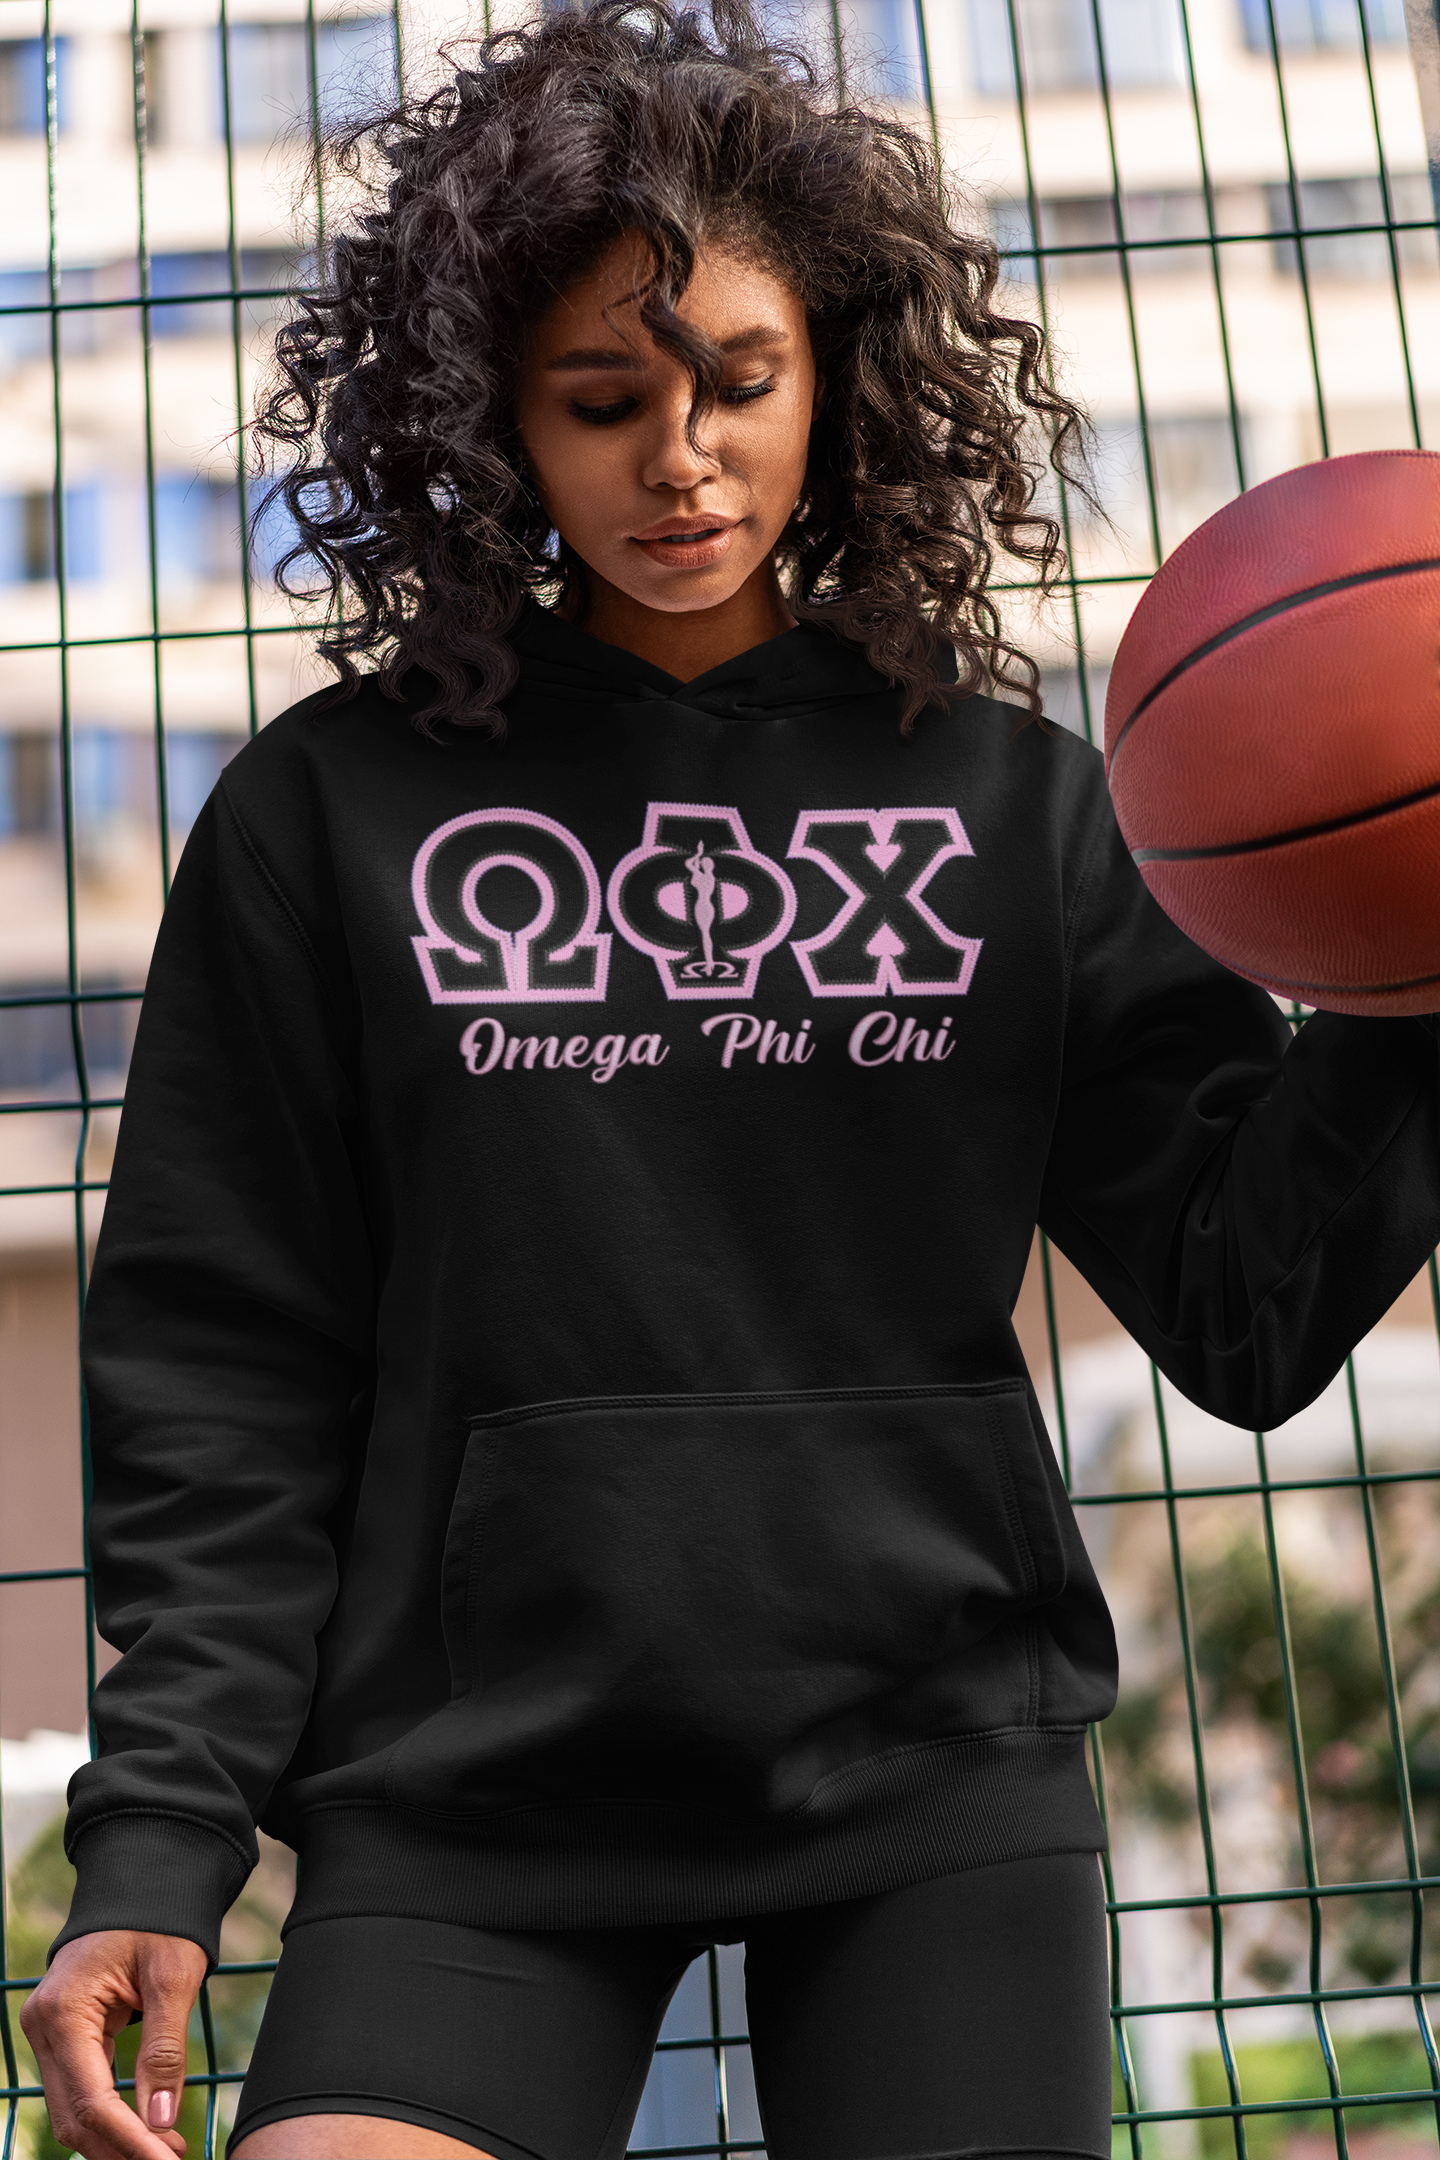 Omega Phi Chi Hoodie - In Pink & Black (OLNA Lady)